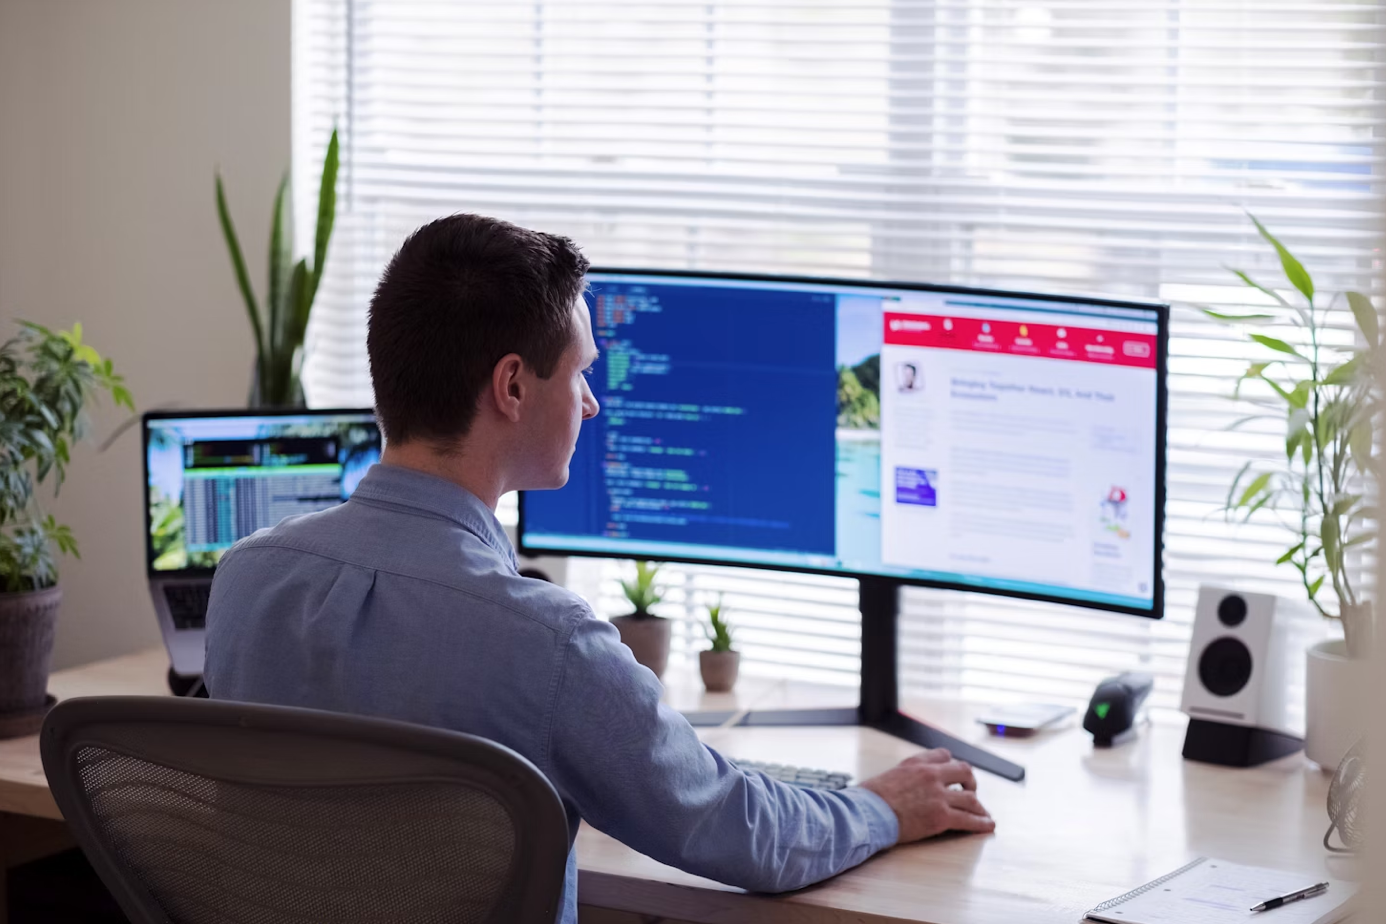 Man in dress shirt at desk with computer monitor; image by Luke Peters, via Unsplash.com.